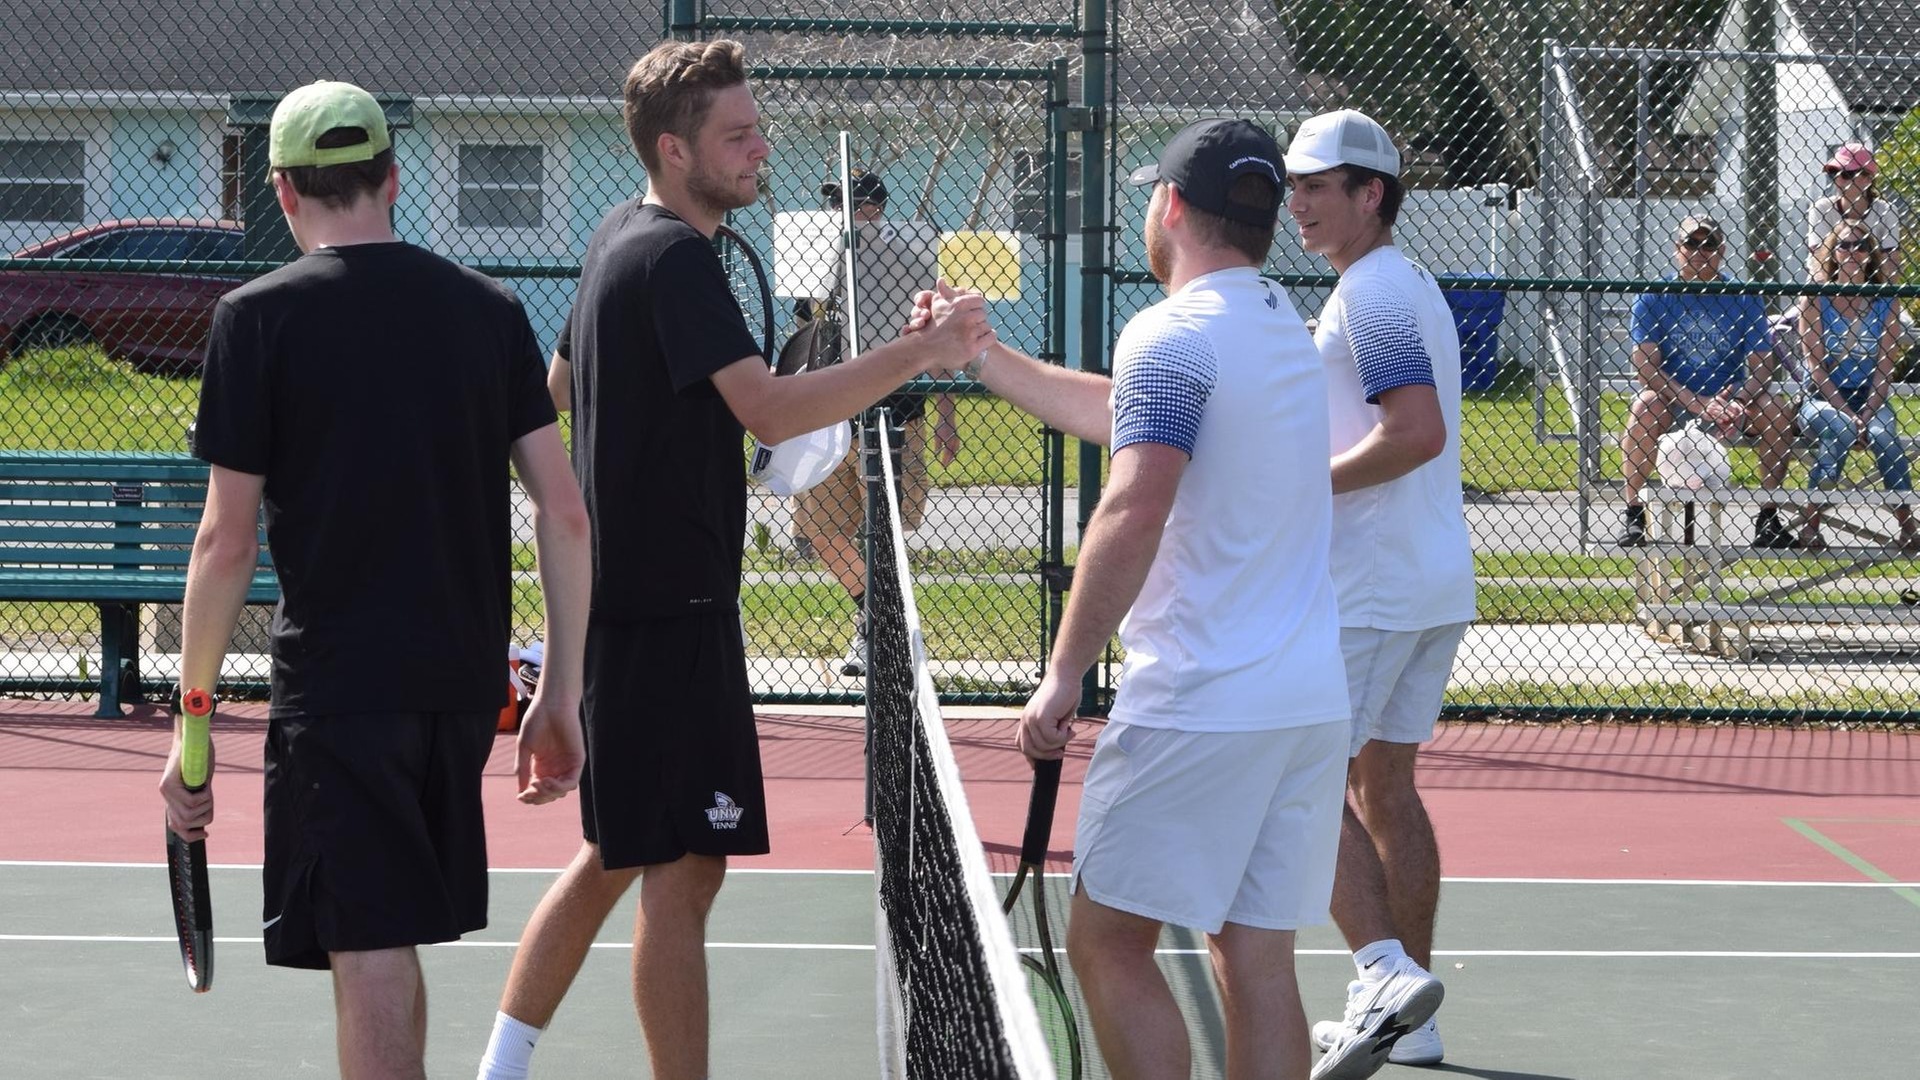 Sam Middleton (second from right) and Alex Colon competed at the top doubles spot and top two singles positions for the Seahawks. (Photo by Ed Habershaw '03M)